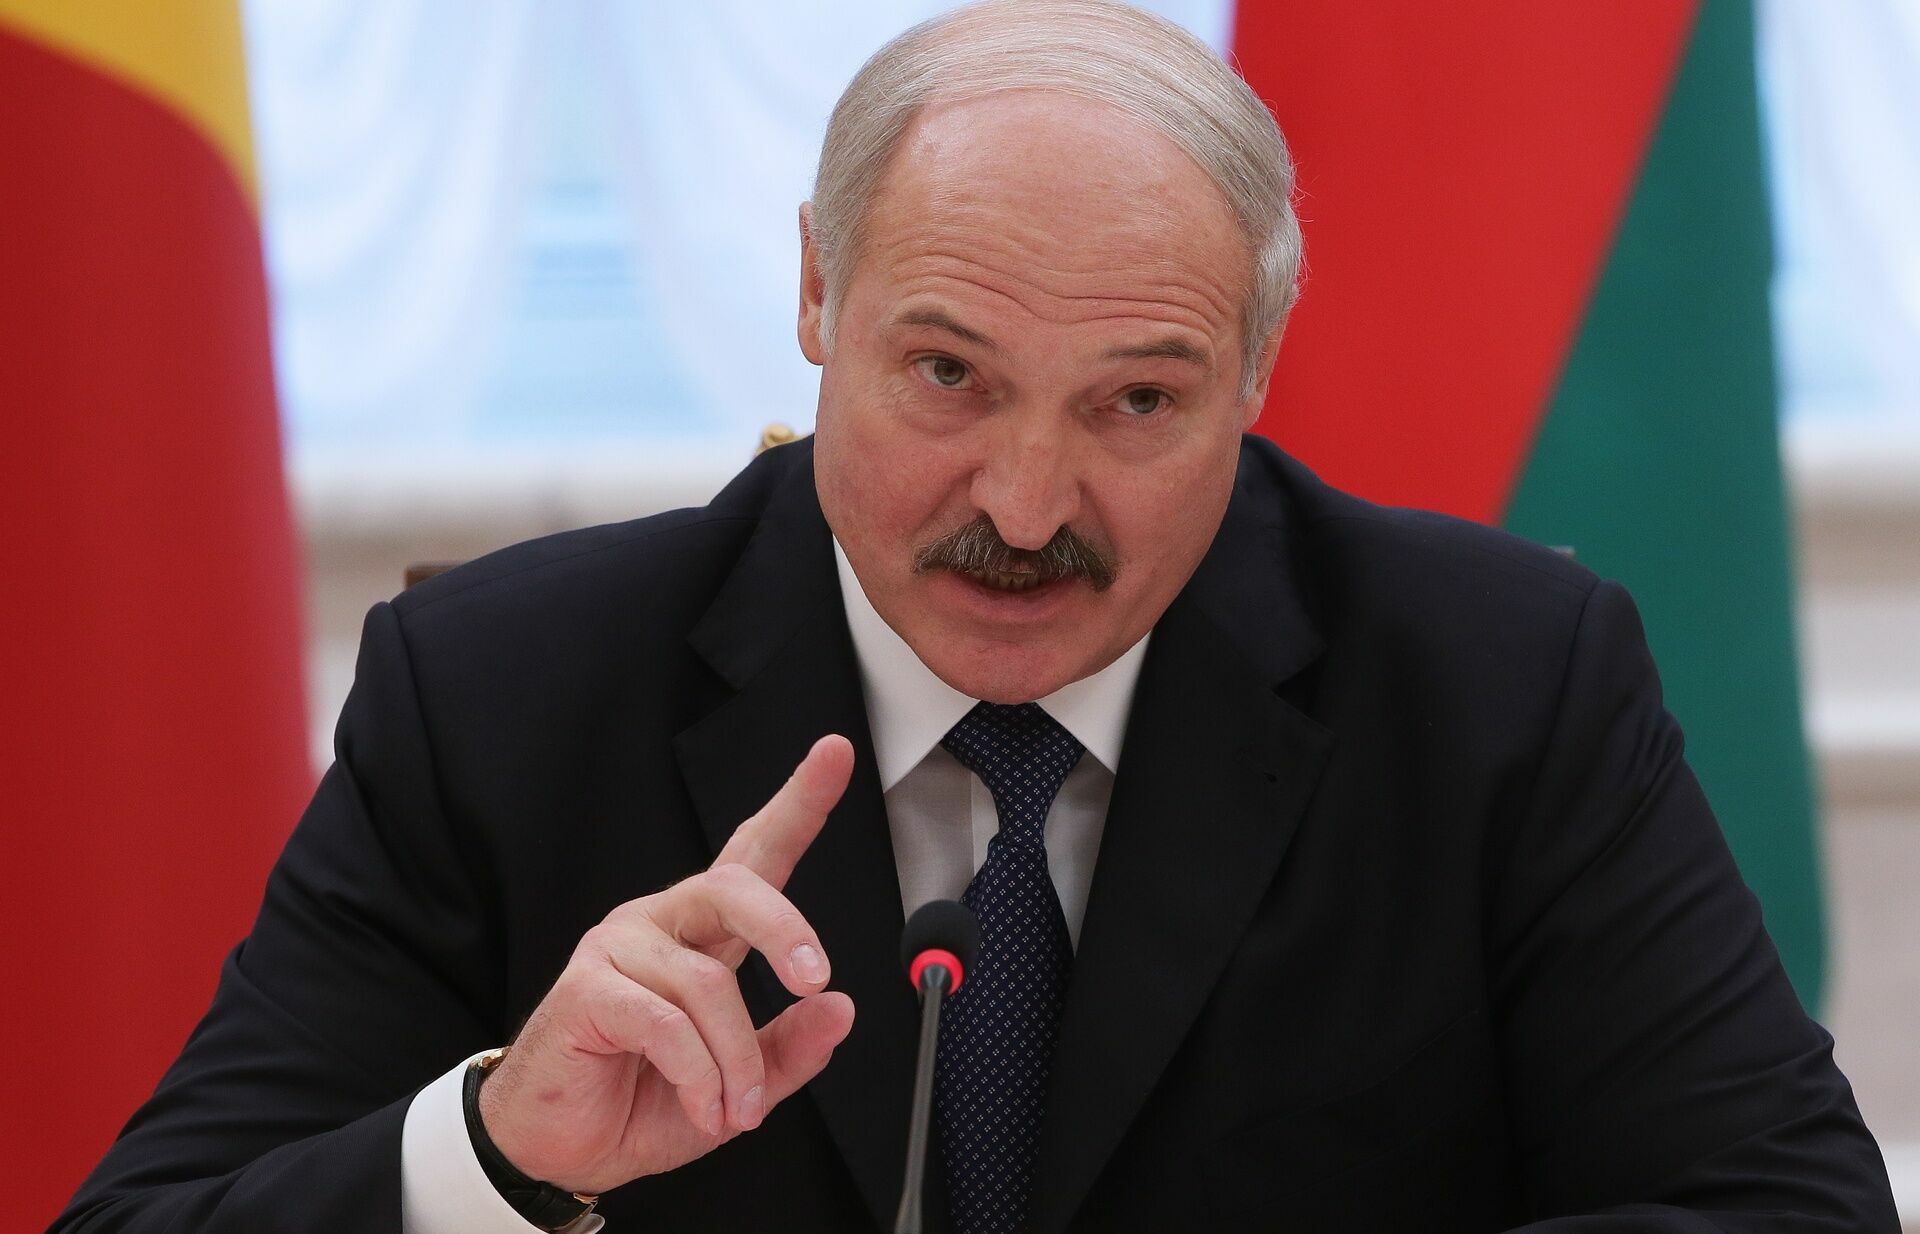 Lukashenko said that people with US passports were detained in Belarus